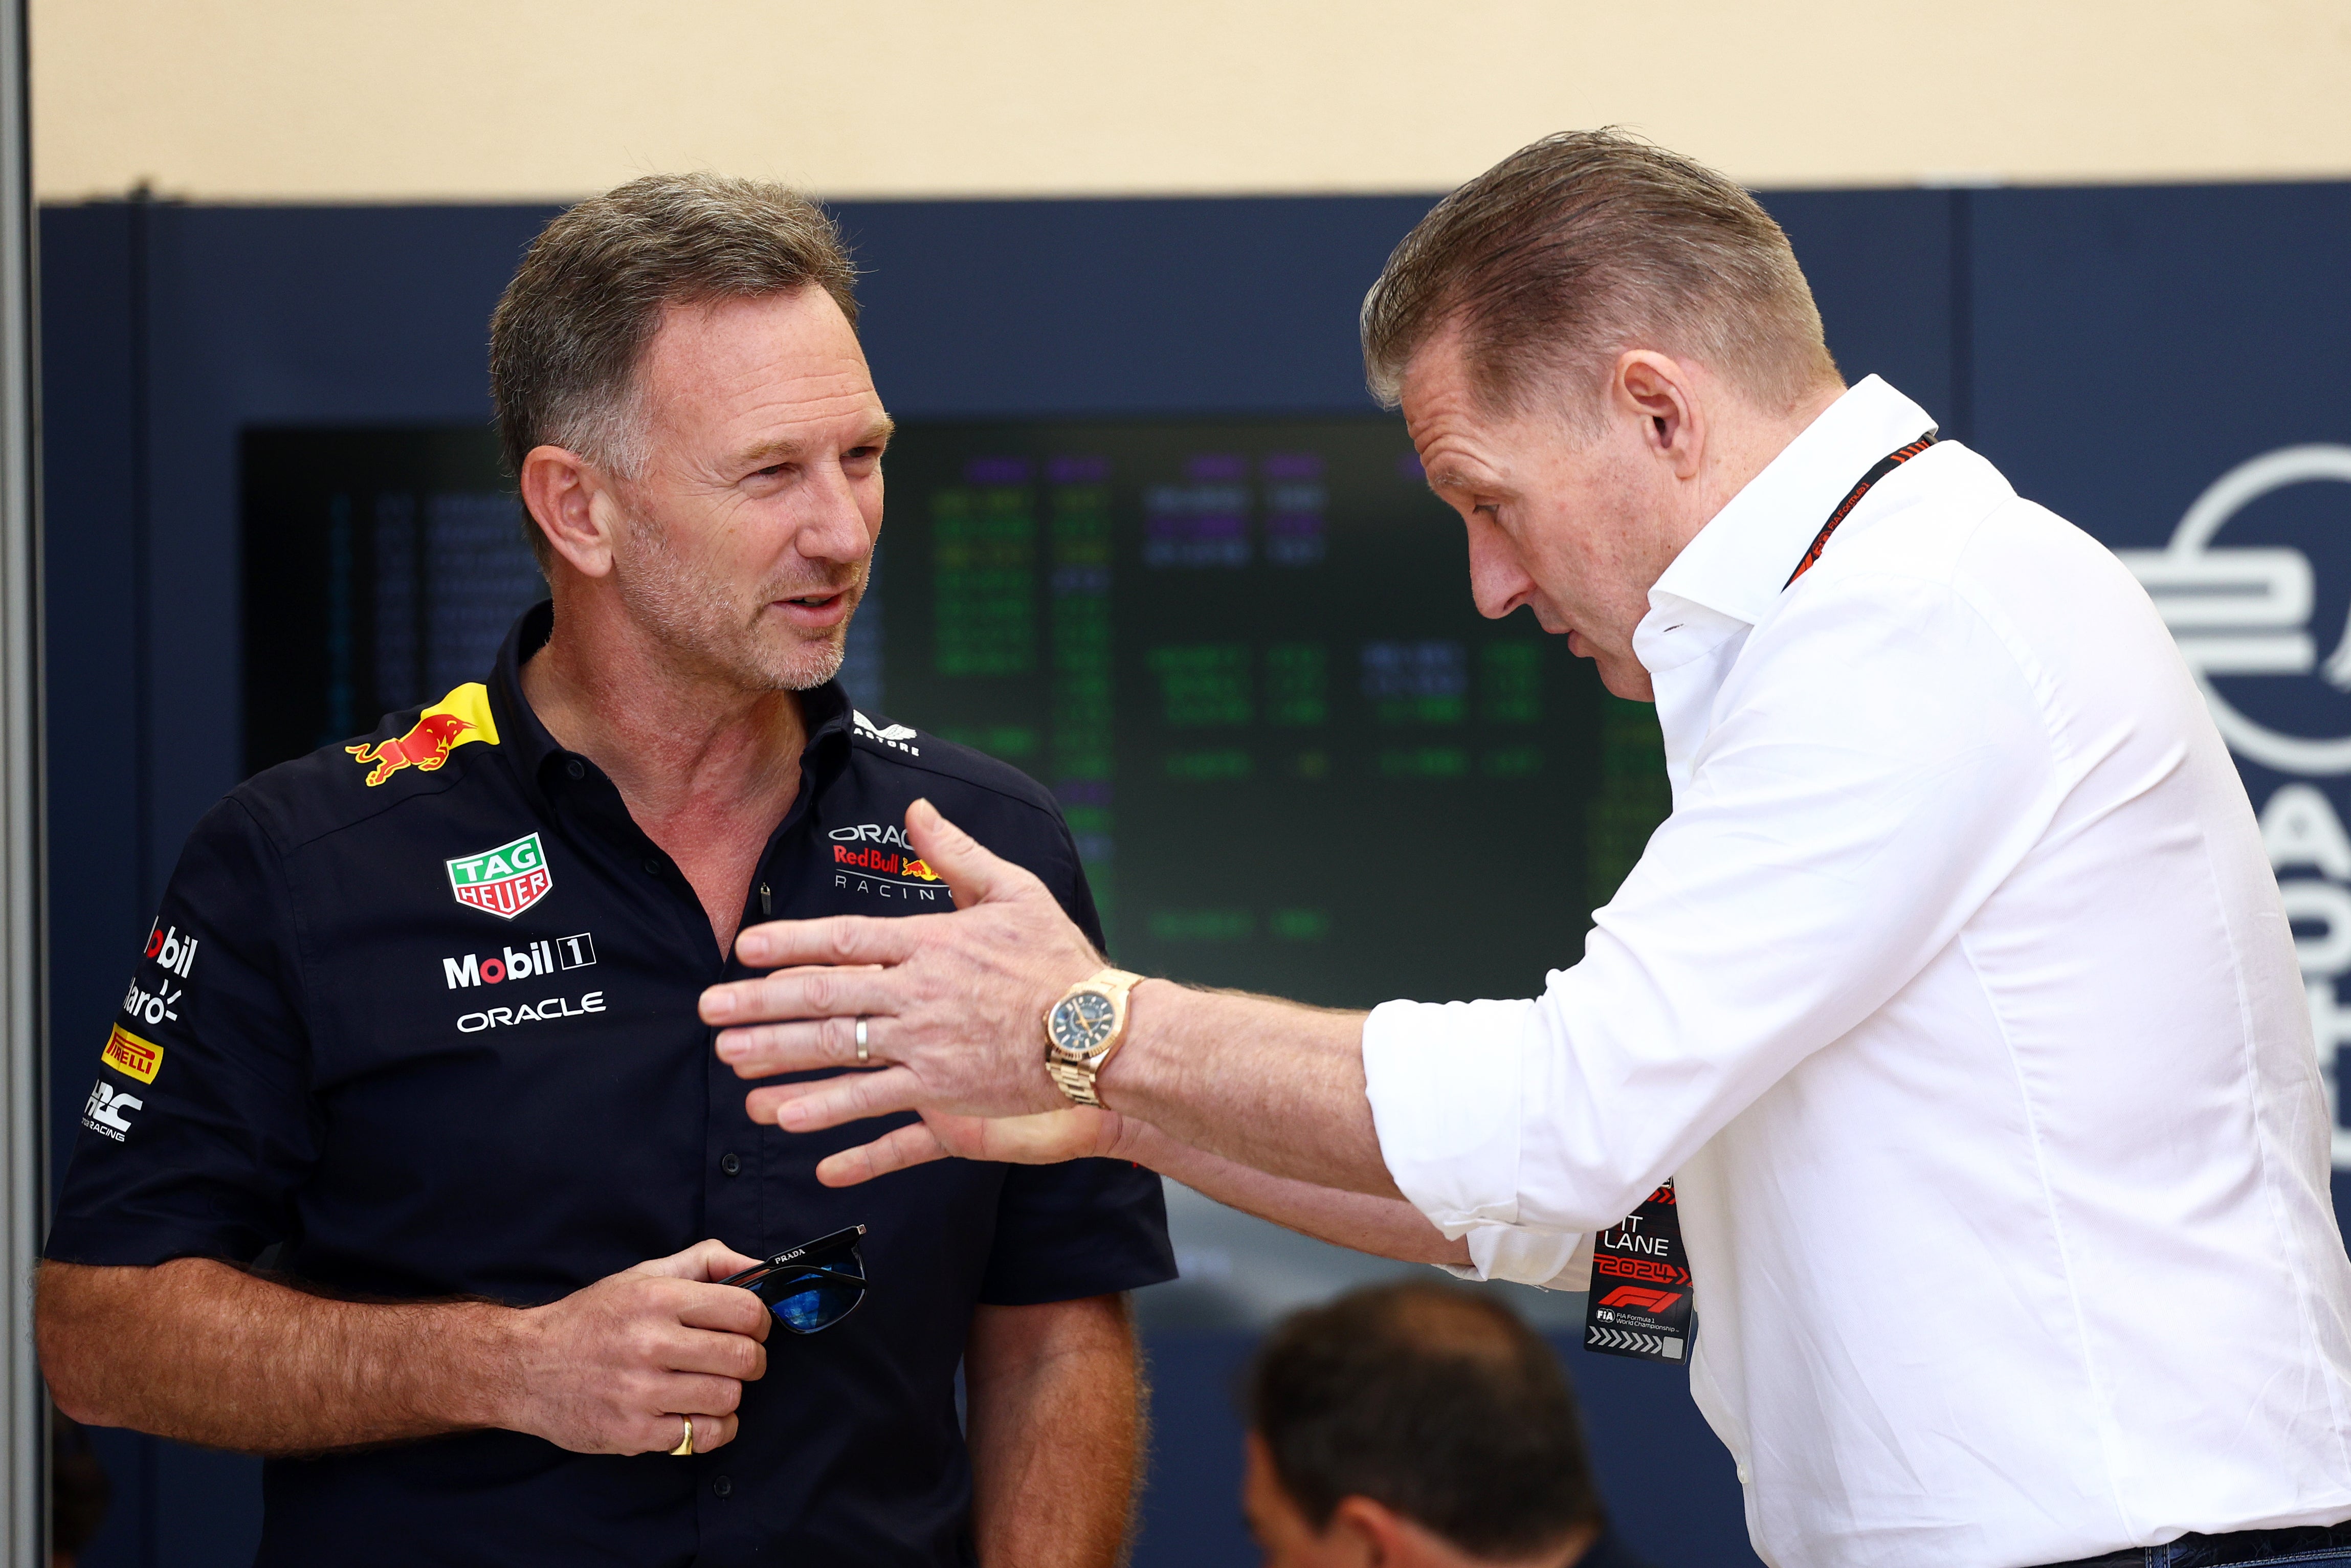 Jos Verstappen (right) has denied being the source of the leaked messages involving Christian Horner